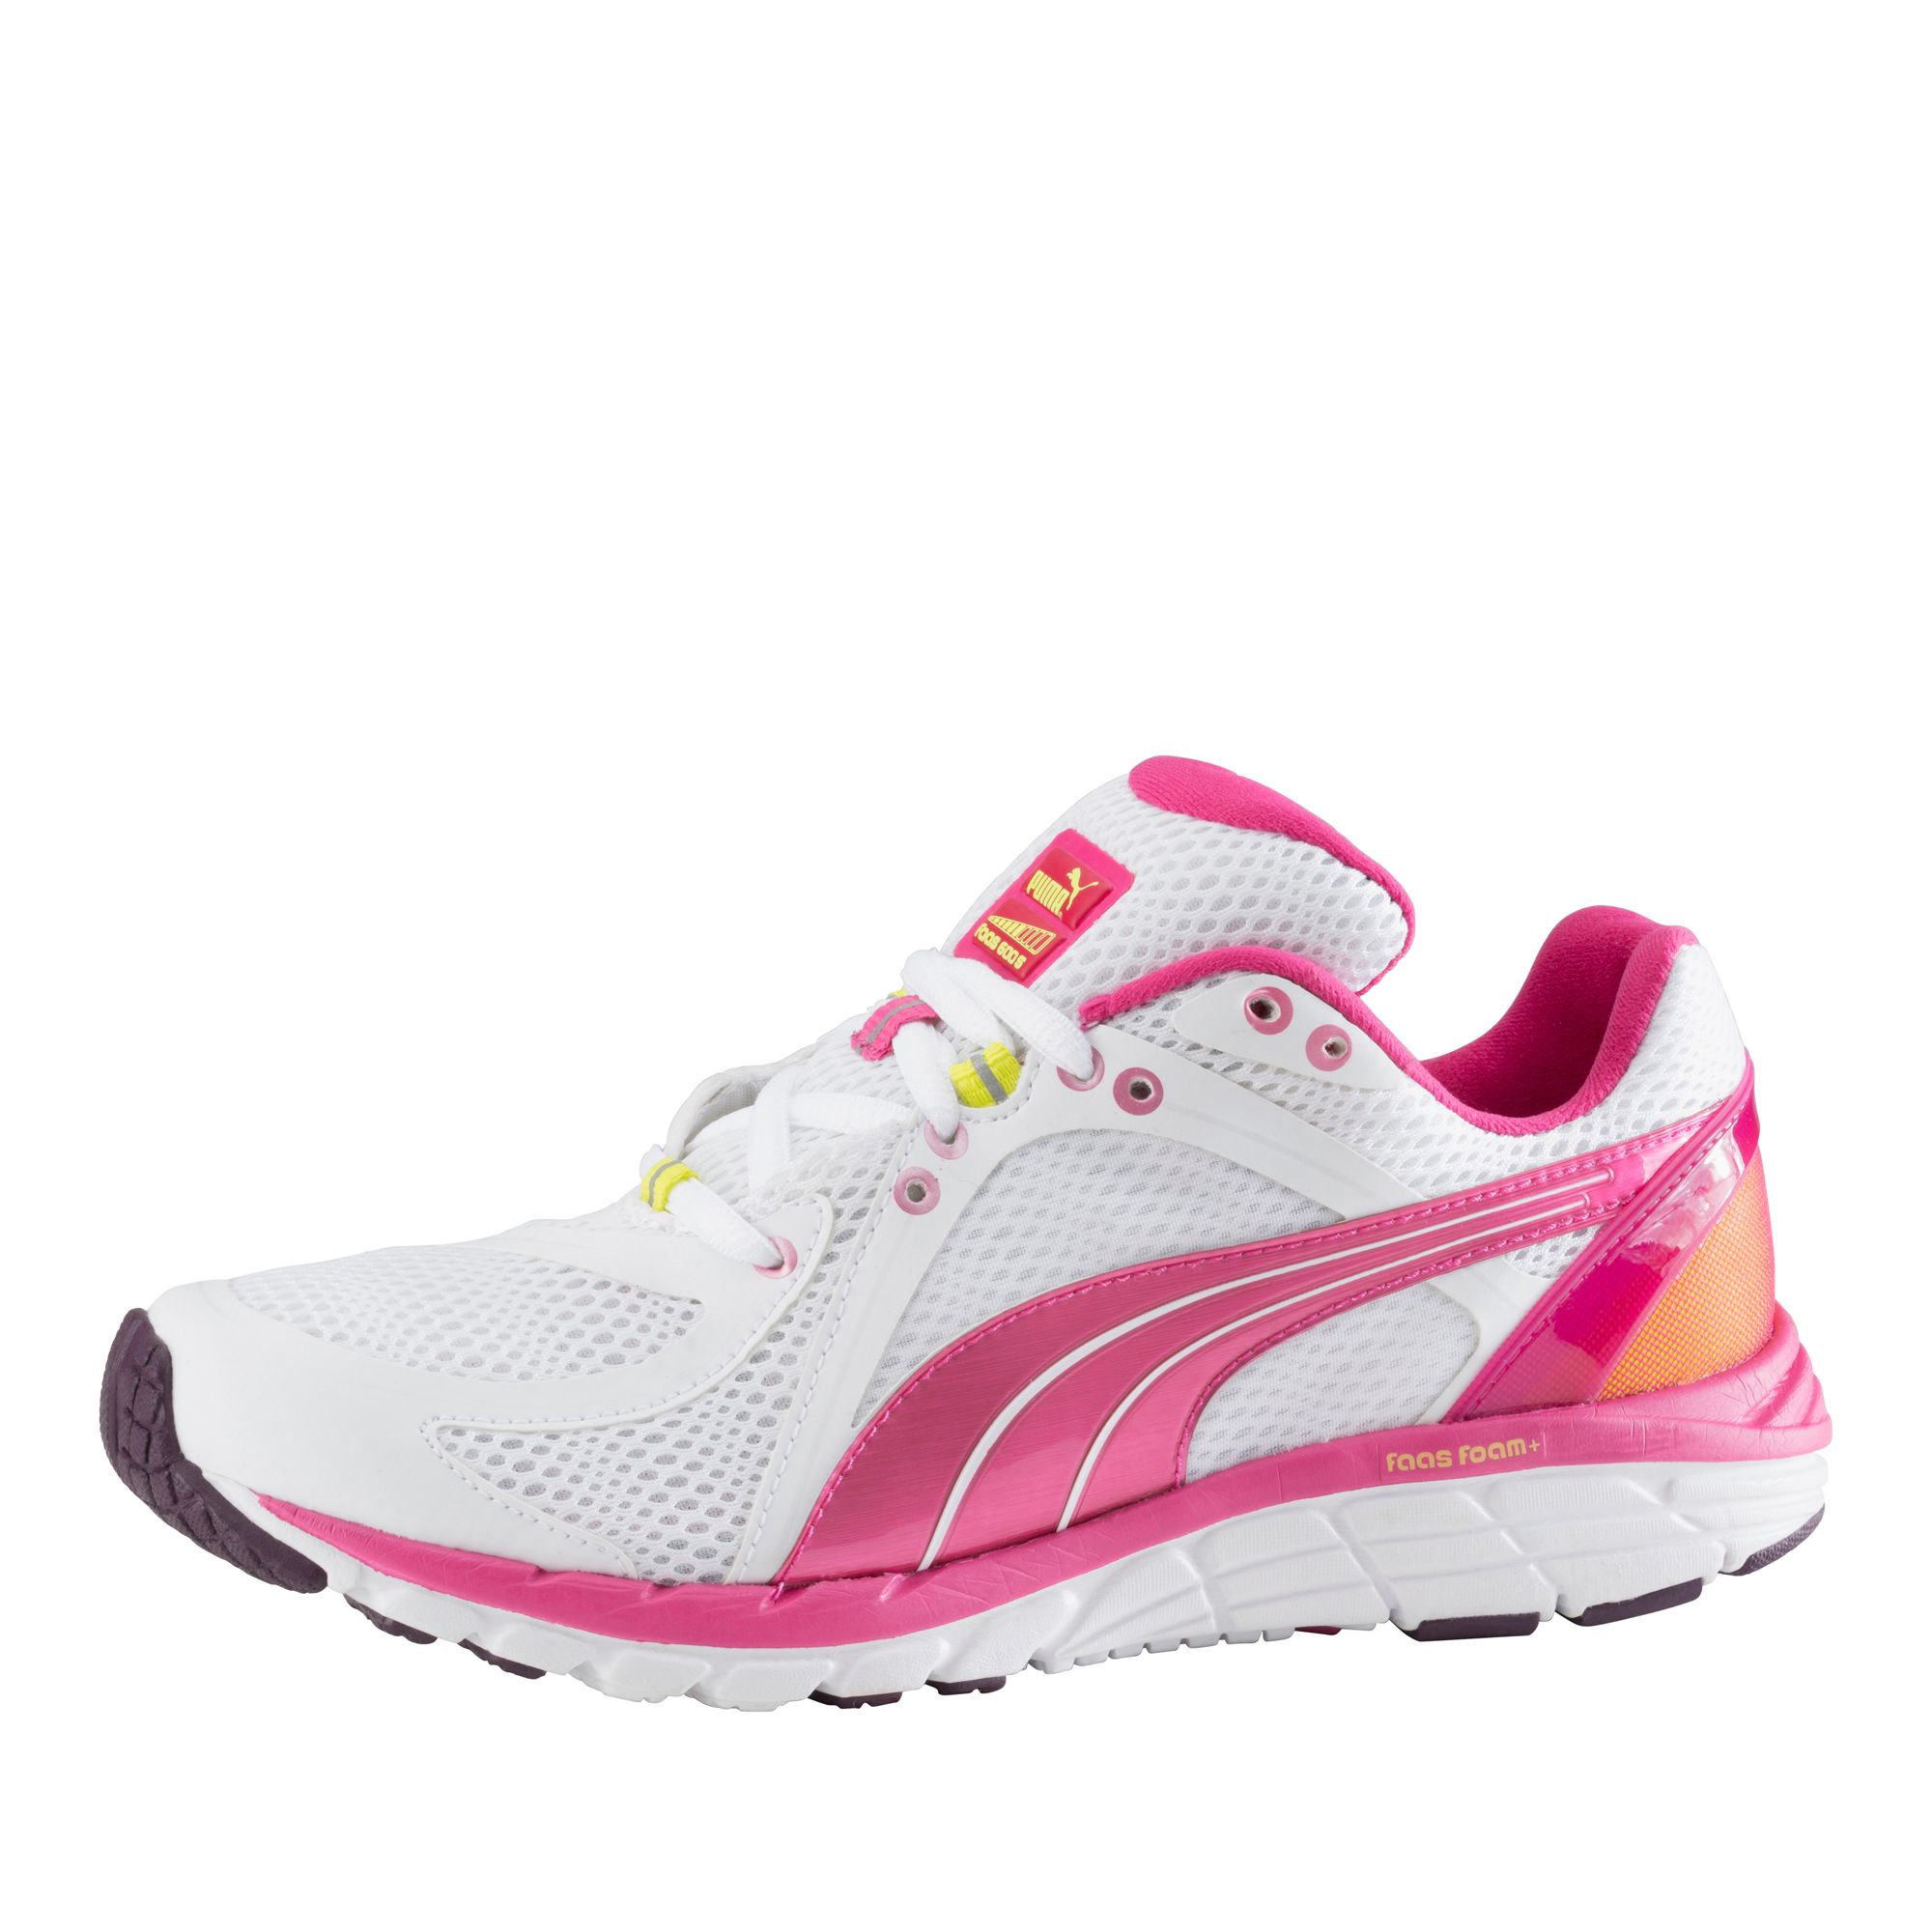 FAAS 600 S Running Shoes 